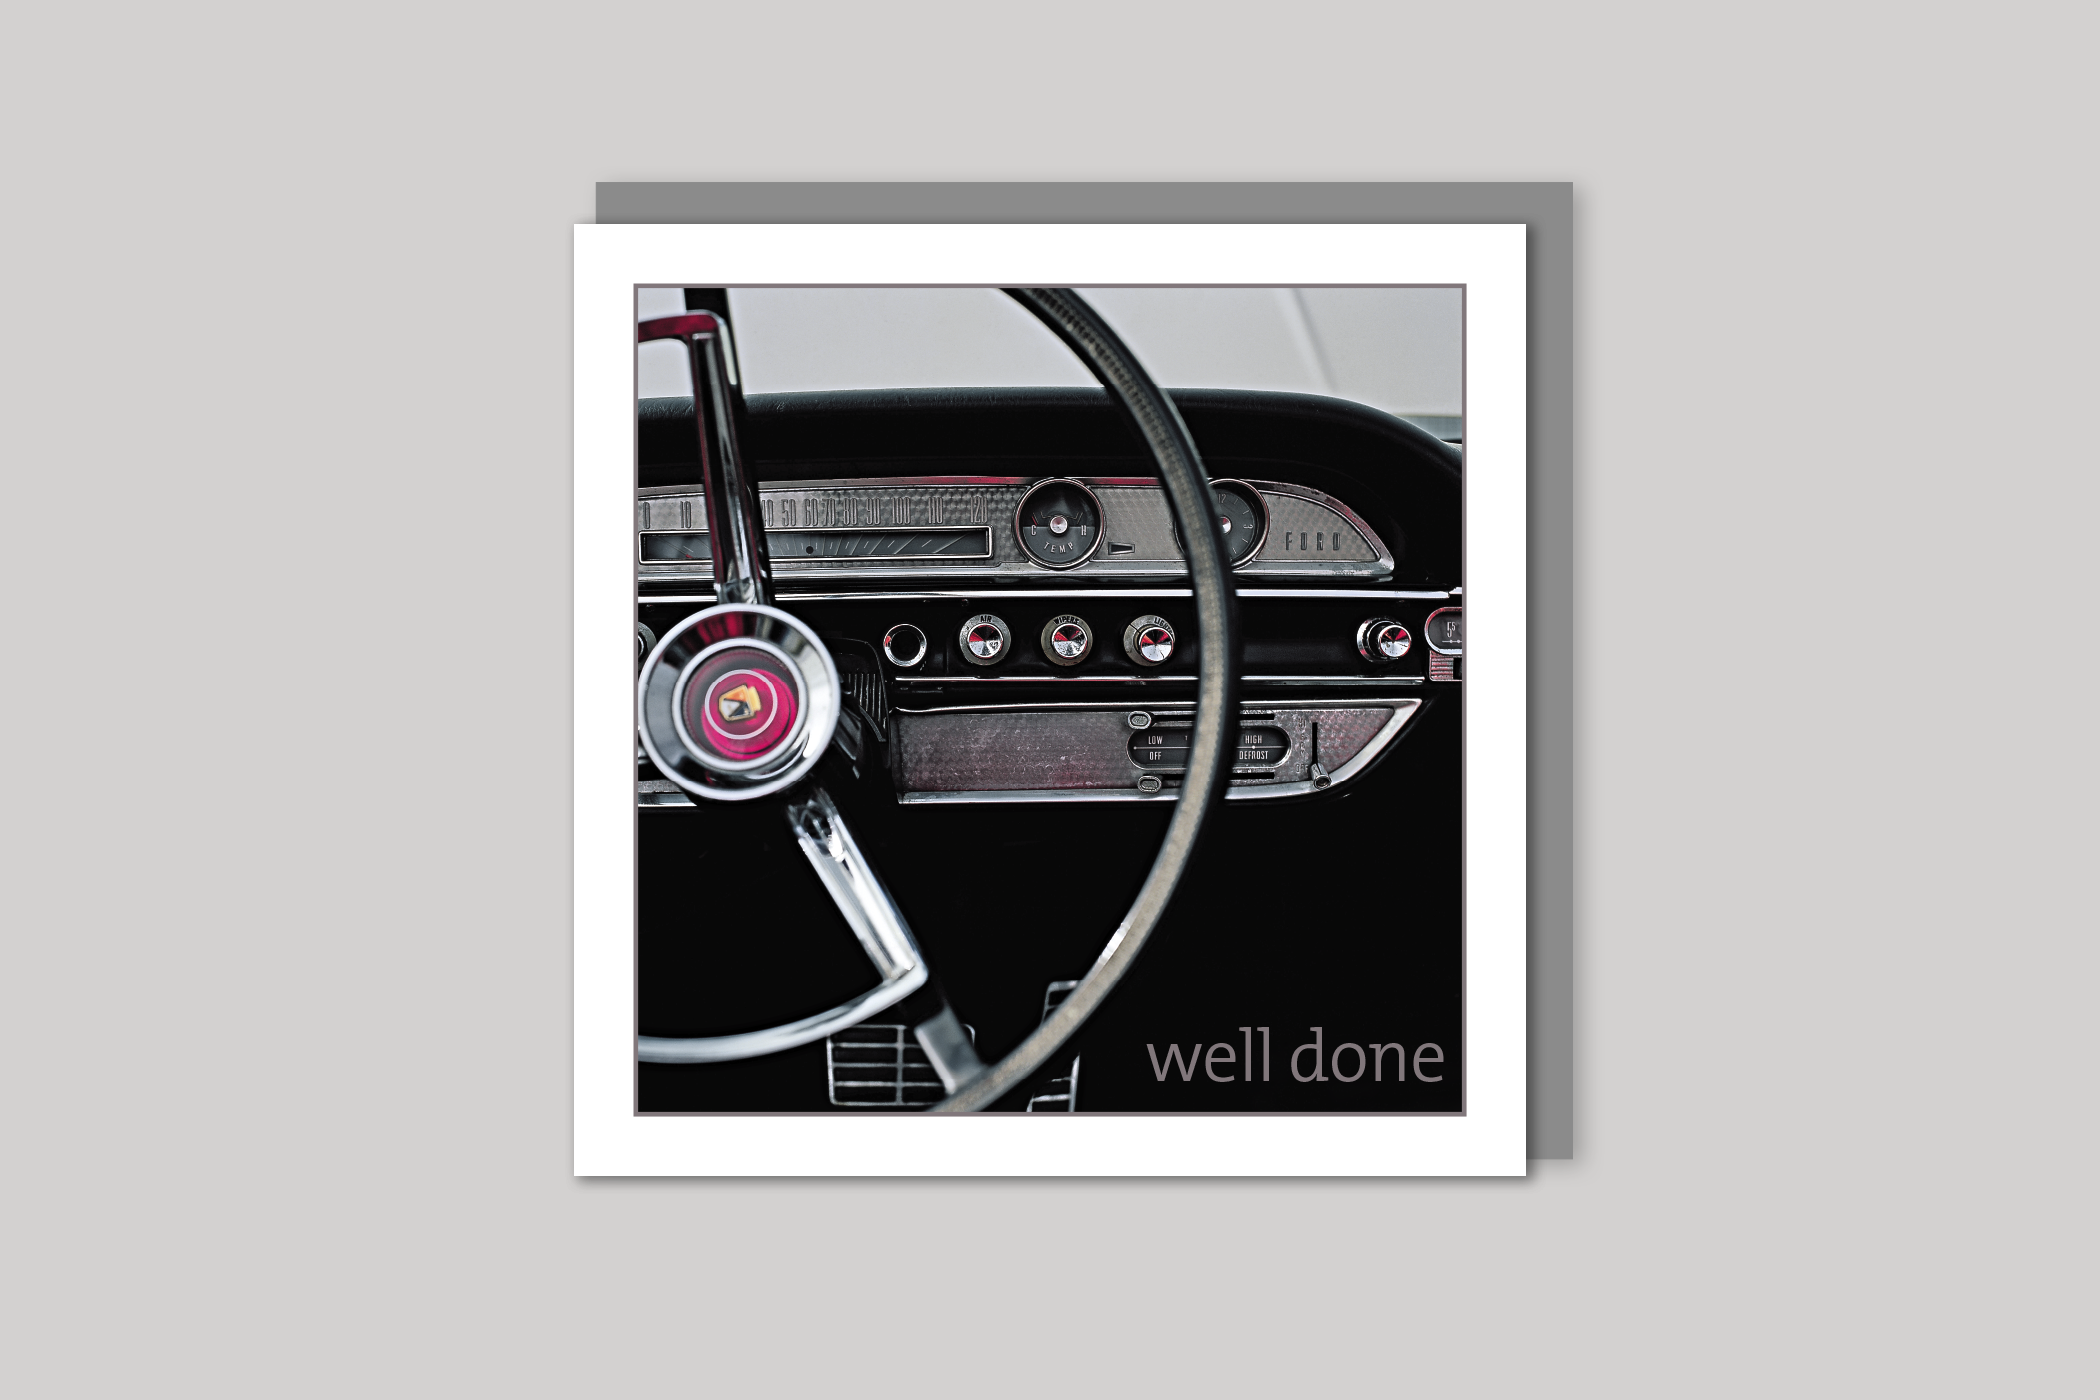 Vintage Car driving test card from Exposure Silver Edition range of greeting cards by Icon, back page.